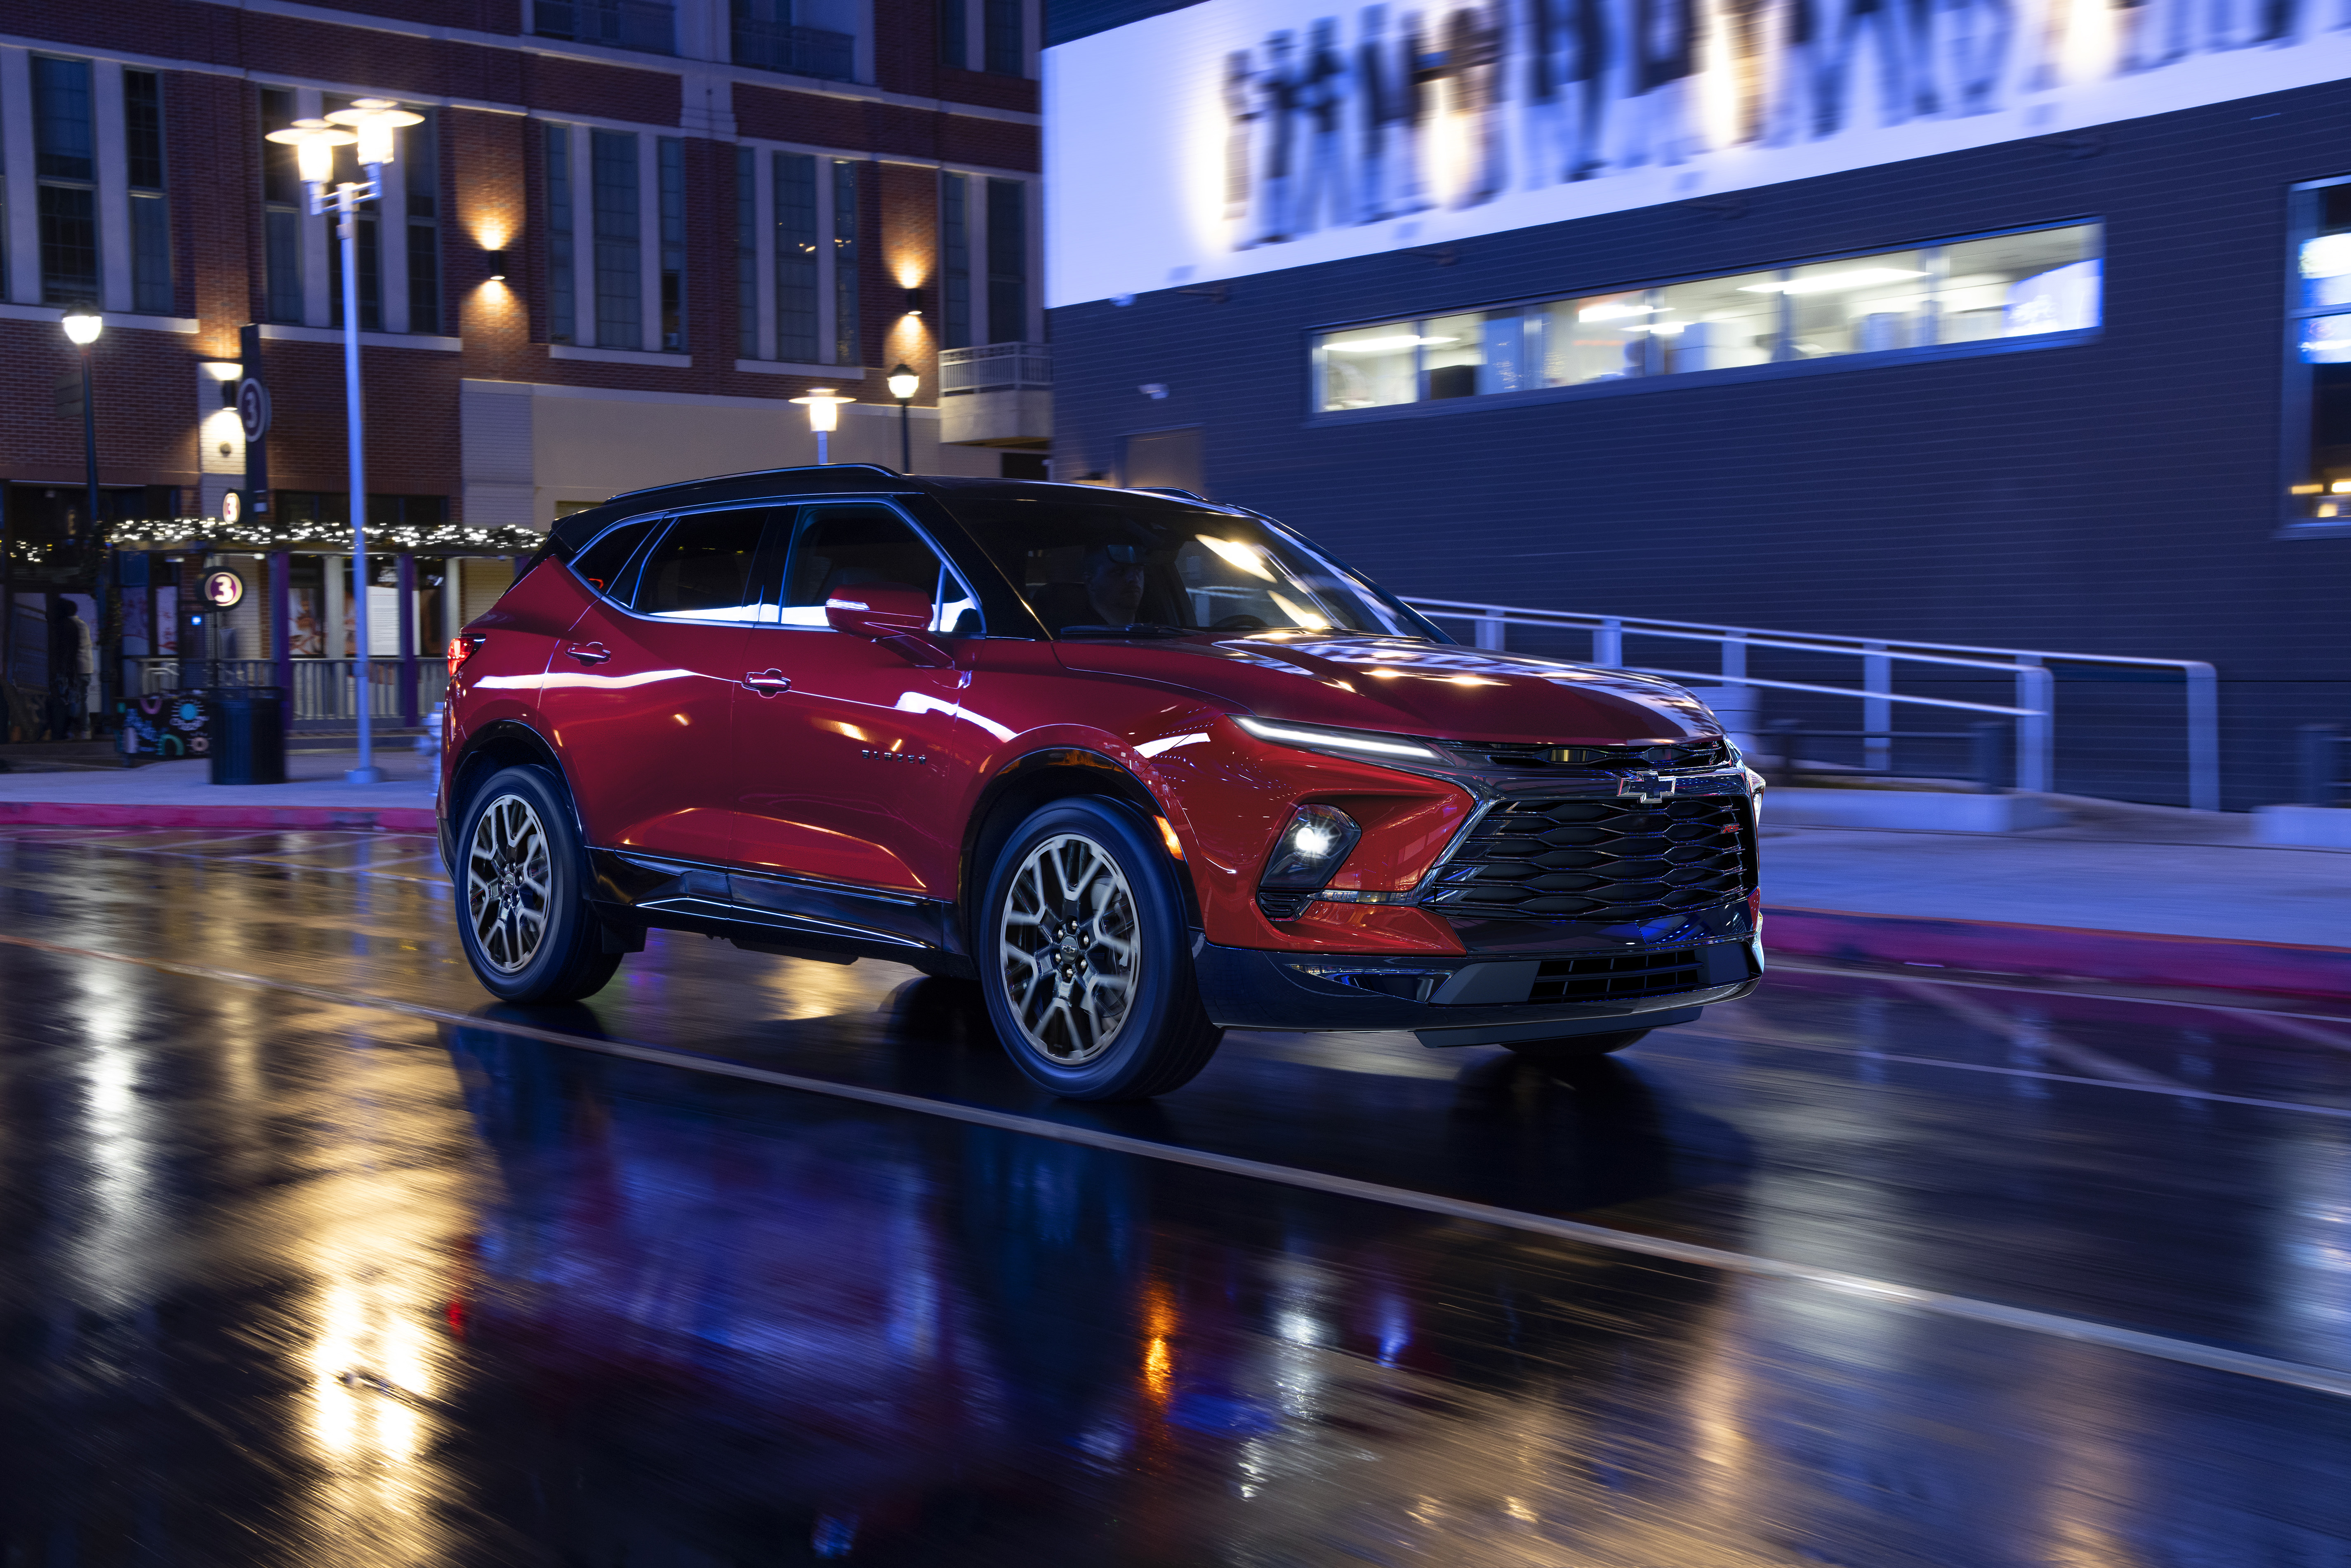 Chevrolet Blazer Rs Wallpapers